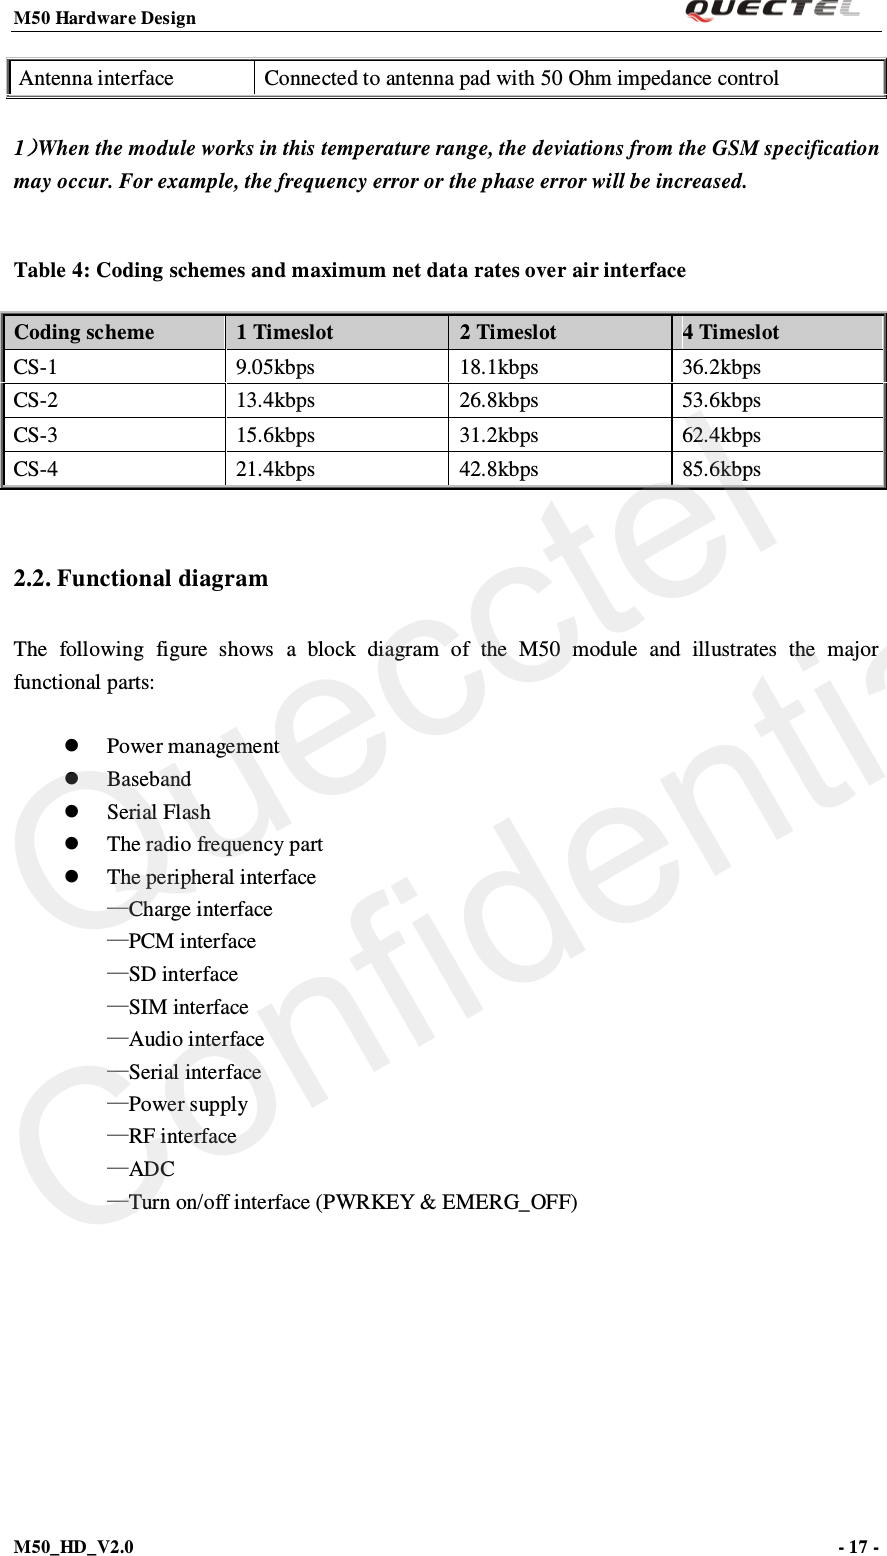 M50 Hardware Design                                                                M50_HD_V2.0                                                                      - 17 -   Antenna interface Connected to antenna pad with 50 Ohm impedance control  1）When the module works in this temperature range, the deviations from the GSM specification may occur. For example, the frequency error or the phase error will be increased.  Table 4: Coding schemes and maximum net data rates over air interface Coding scheme 1 Timeslot 2 Timeslot 4 Timeslot CS-1  9.05kbps 18.1kbps 36.2kbps CS-2  13.4kbps 26.8kbps 53.6kbps CS-3  15.6kbps 31.2kbps 62.4kbps CS-4  21.4kbps 42.8kbps 85.6kbps  2.2. Functional diagram   The following figure shows a block diagram of the M50  module and illustrates  the major functional parts:   Power management  Baseband  Serial Flash  The radio frequency part  The peripheral interface —Charge interface —PCM interface —SD interface —SIM interface —Audio interface —Serial interface —Power supply —RF interface —ADC —Turn on/off interface (PWRKEY &amp; EMERG_OFF) Quecctel Confidential